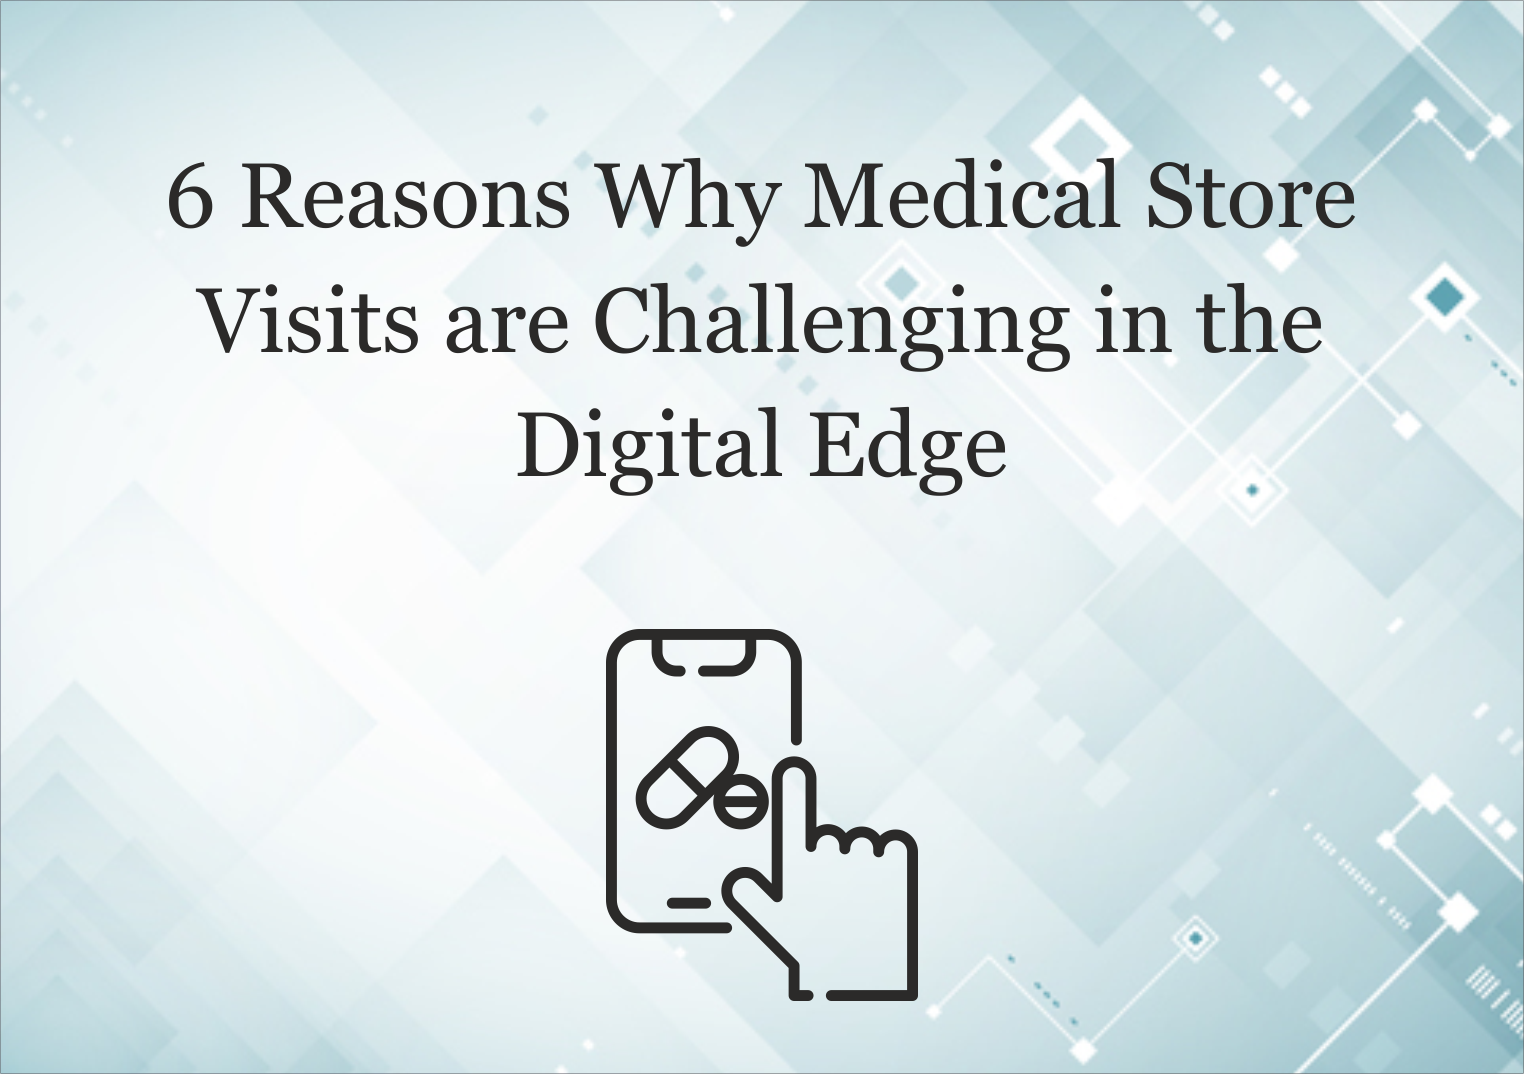 6 Reasons Why Medical Store Visits are Challenging in the Digital Edge